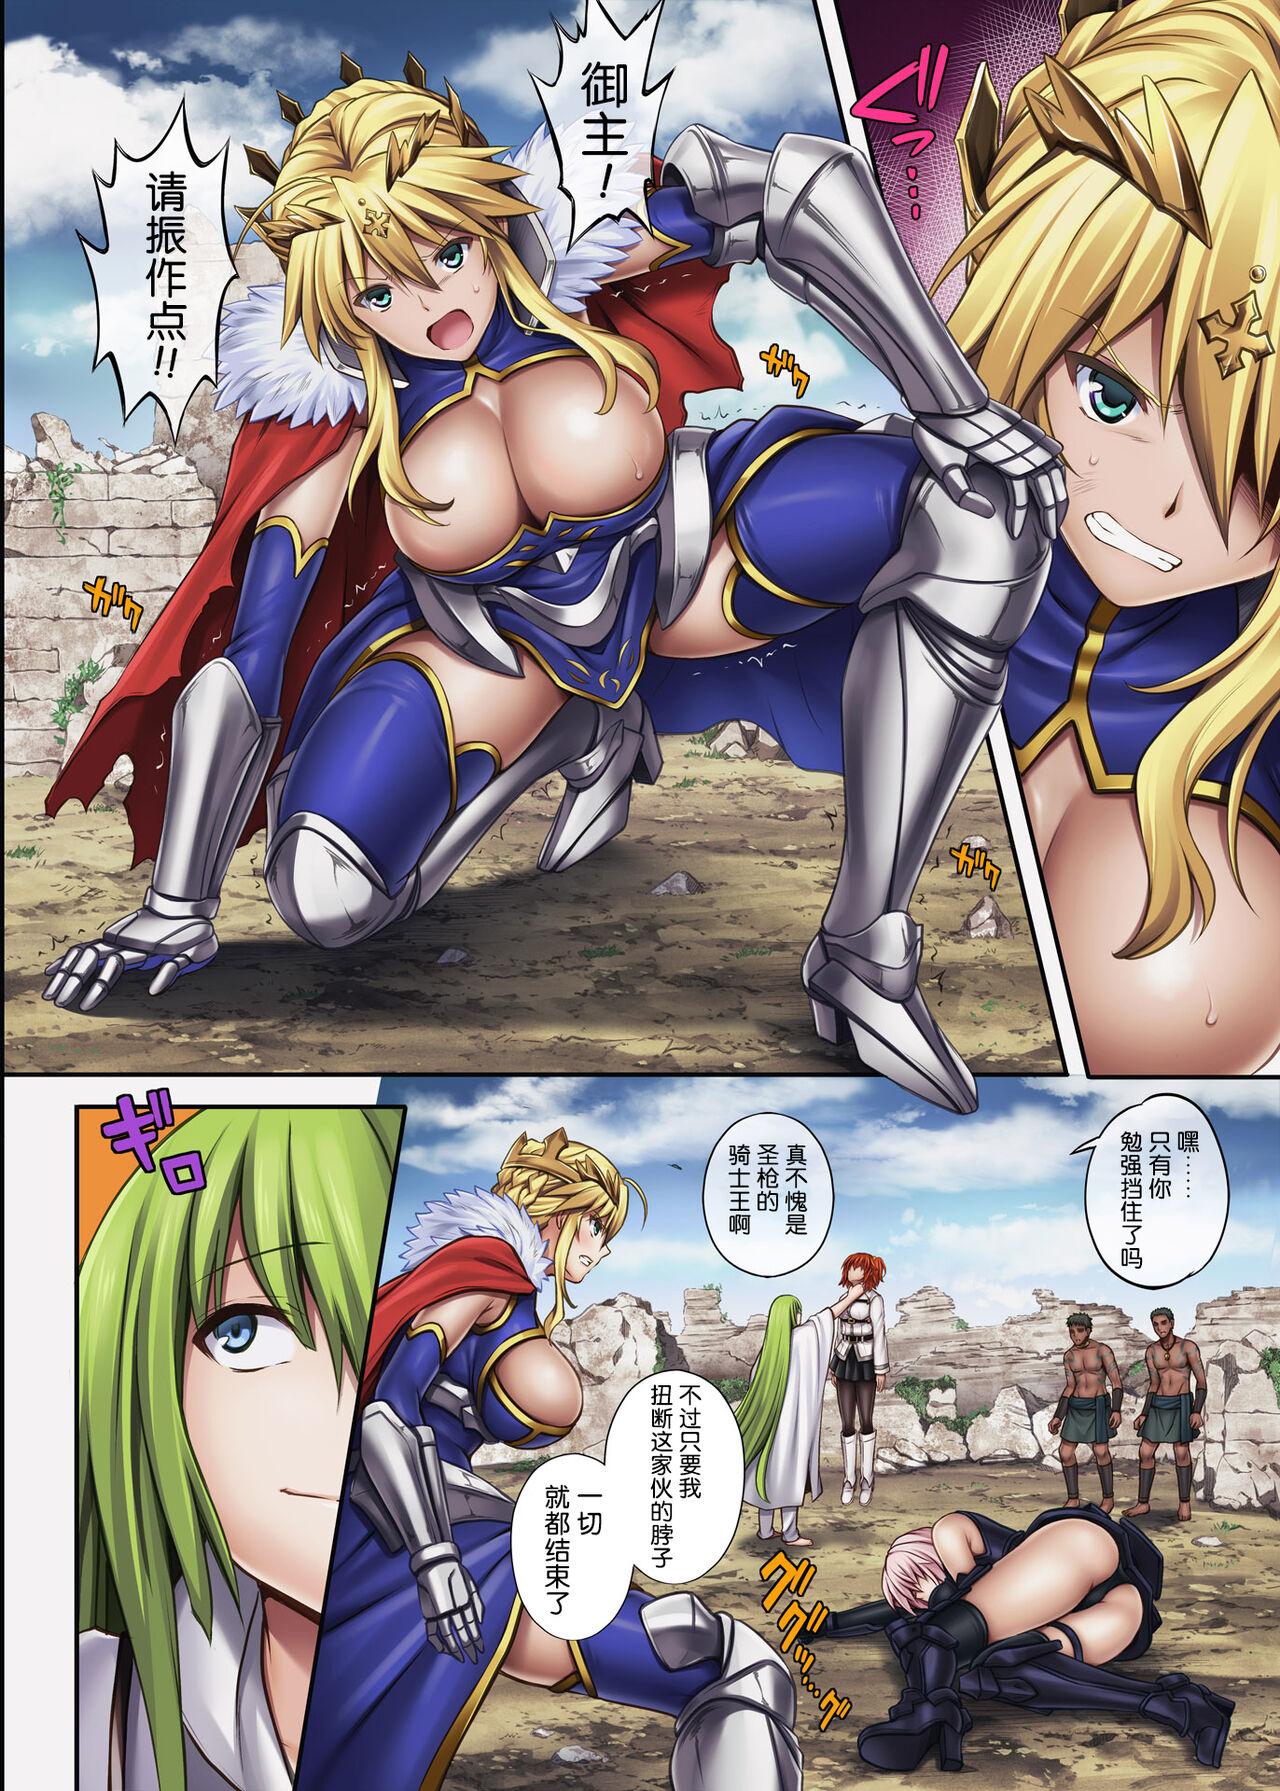 Blowjob Contest Cyclone no Doujinshi Full Color Pack 4 - Fate grand order Celebrity - Page 4